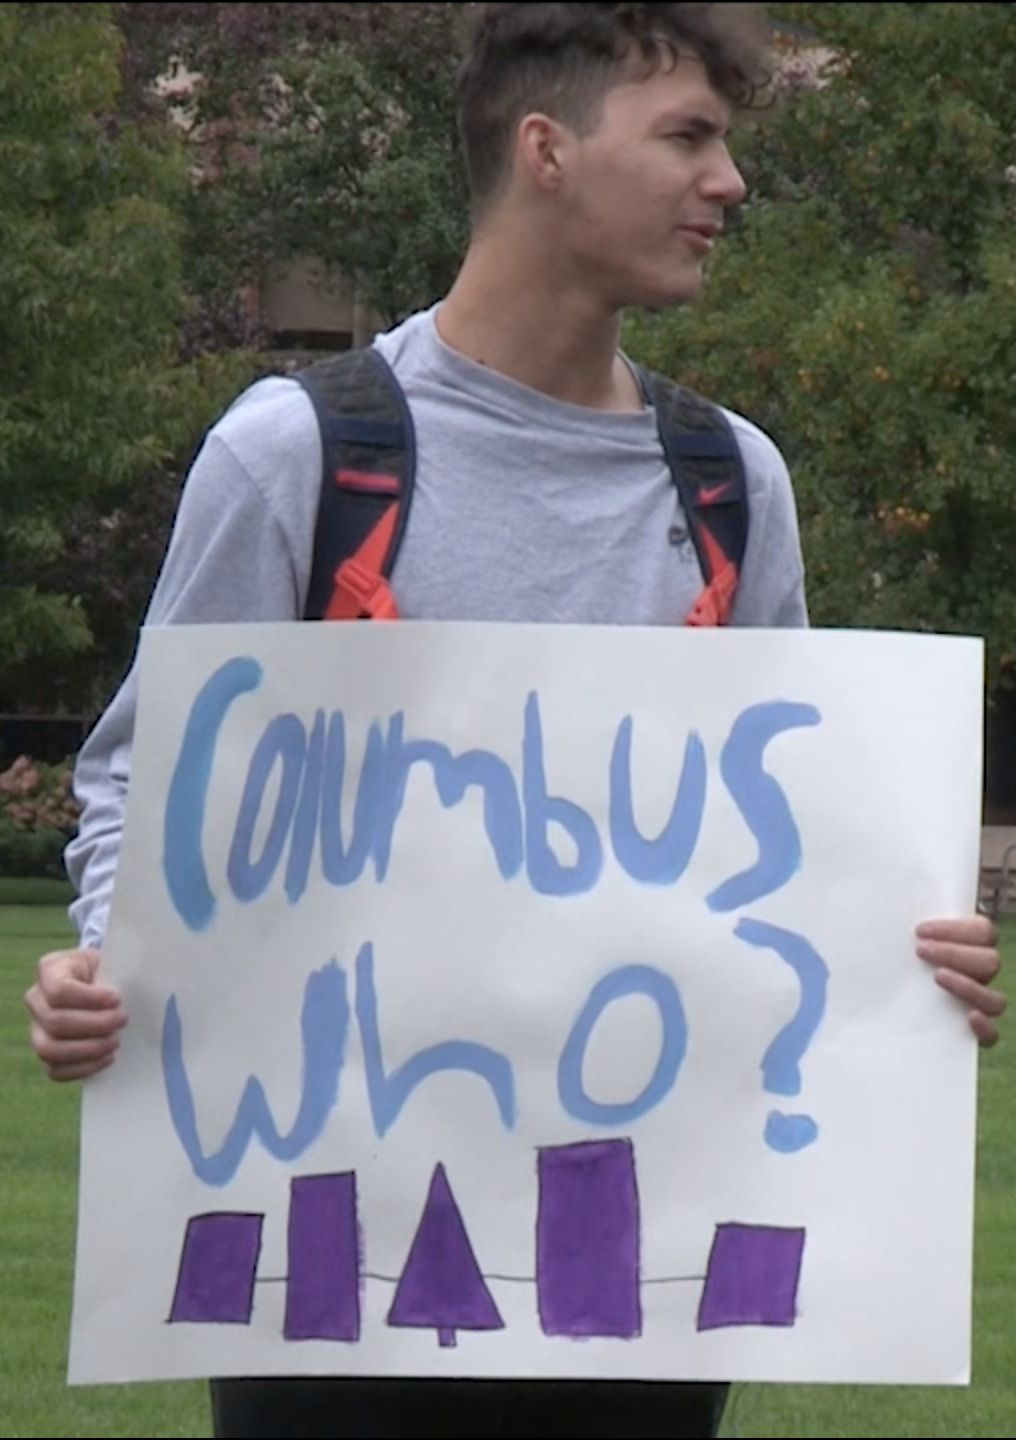 SU students were among protesters on the quad today calling for a change in mentality surrounding Columbus Day